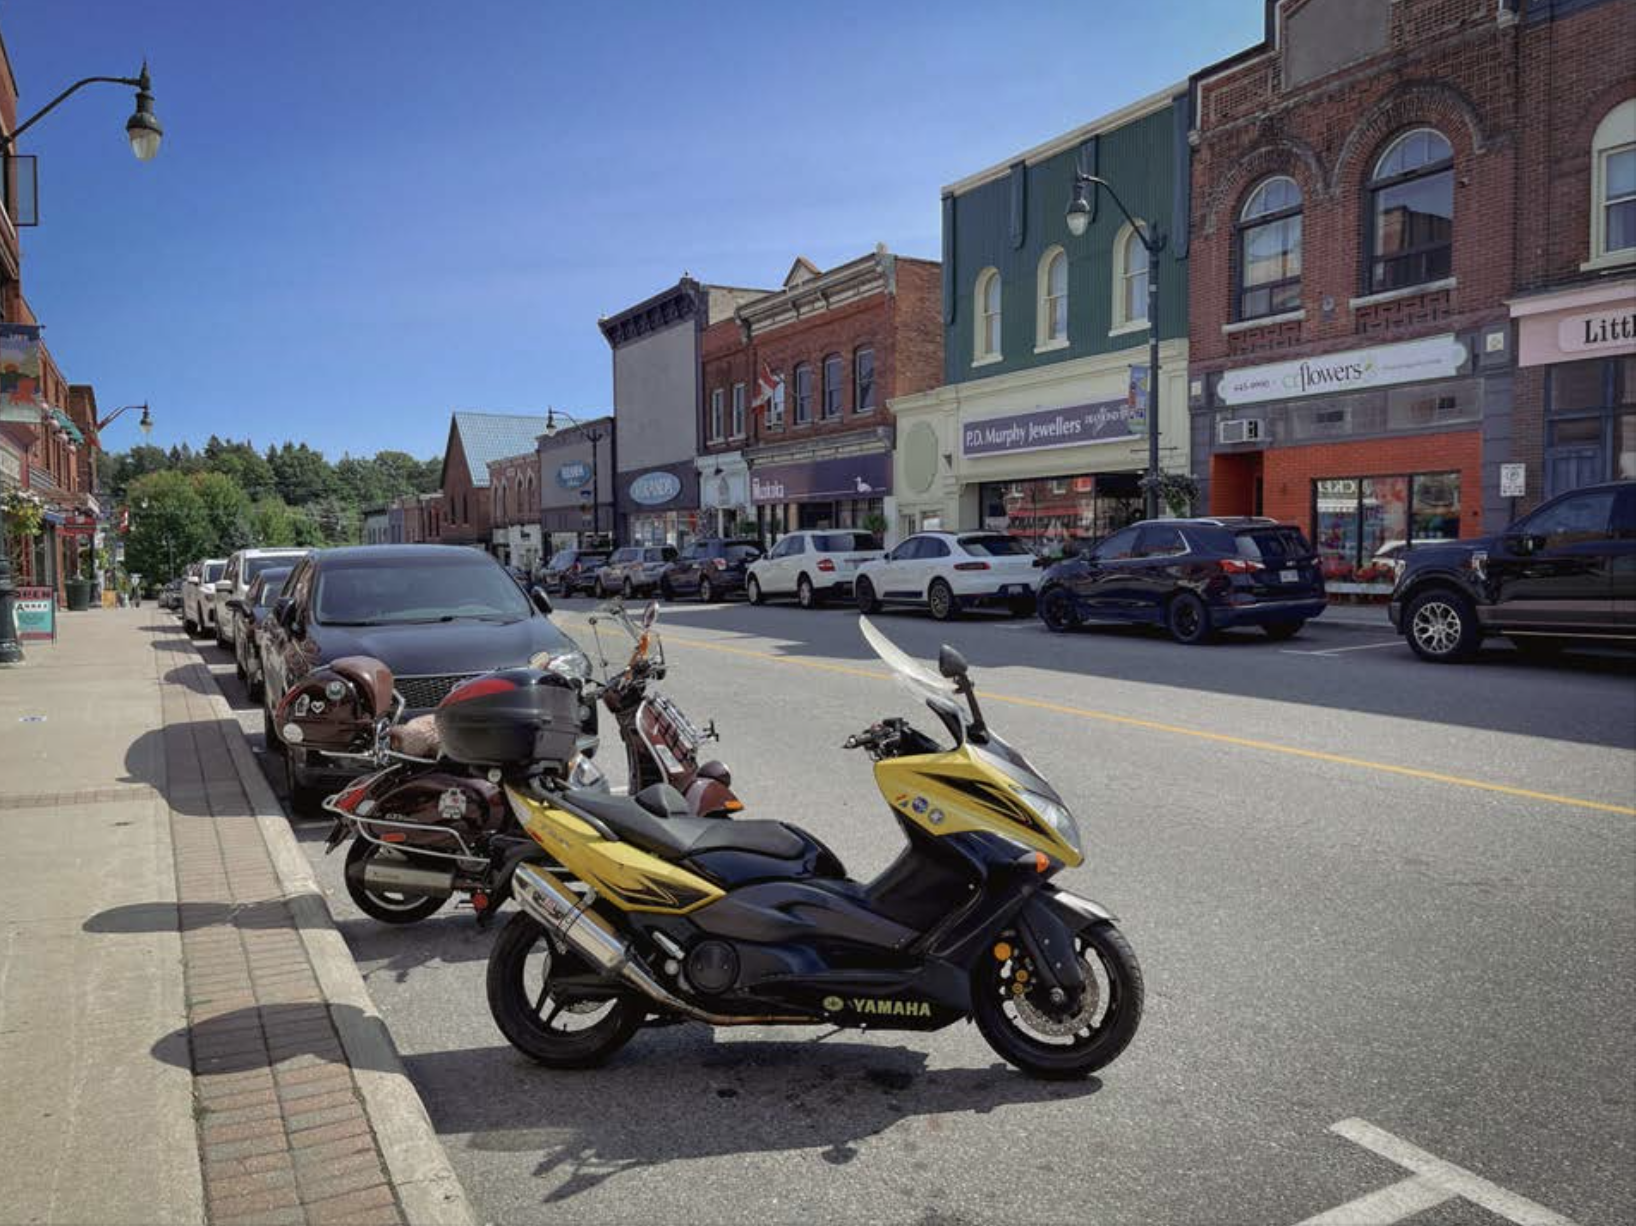 two motorcycles parked along Manitoba Street in Bracebridge; a tidy-looking street lined with attractive antique buildings, under a bright blue sunny sky.